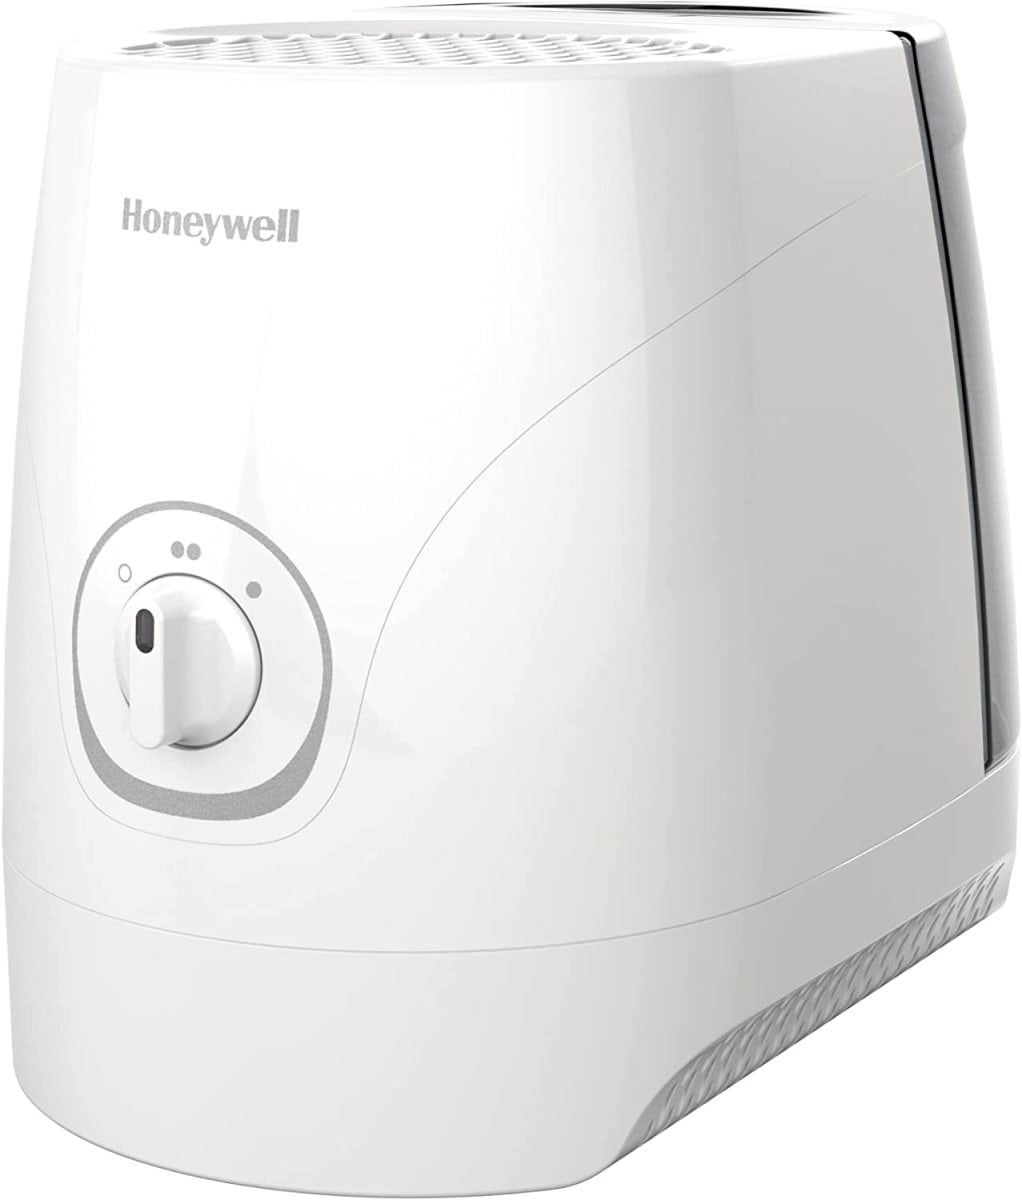 Cool Moisture Humidifier White Ultra Quiet with Auto Shut-Off, Variable Settings & Wicking Filter for Small to Medium Rooms, Bedroom, Baby Room